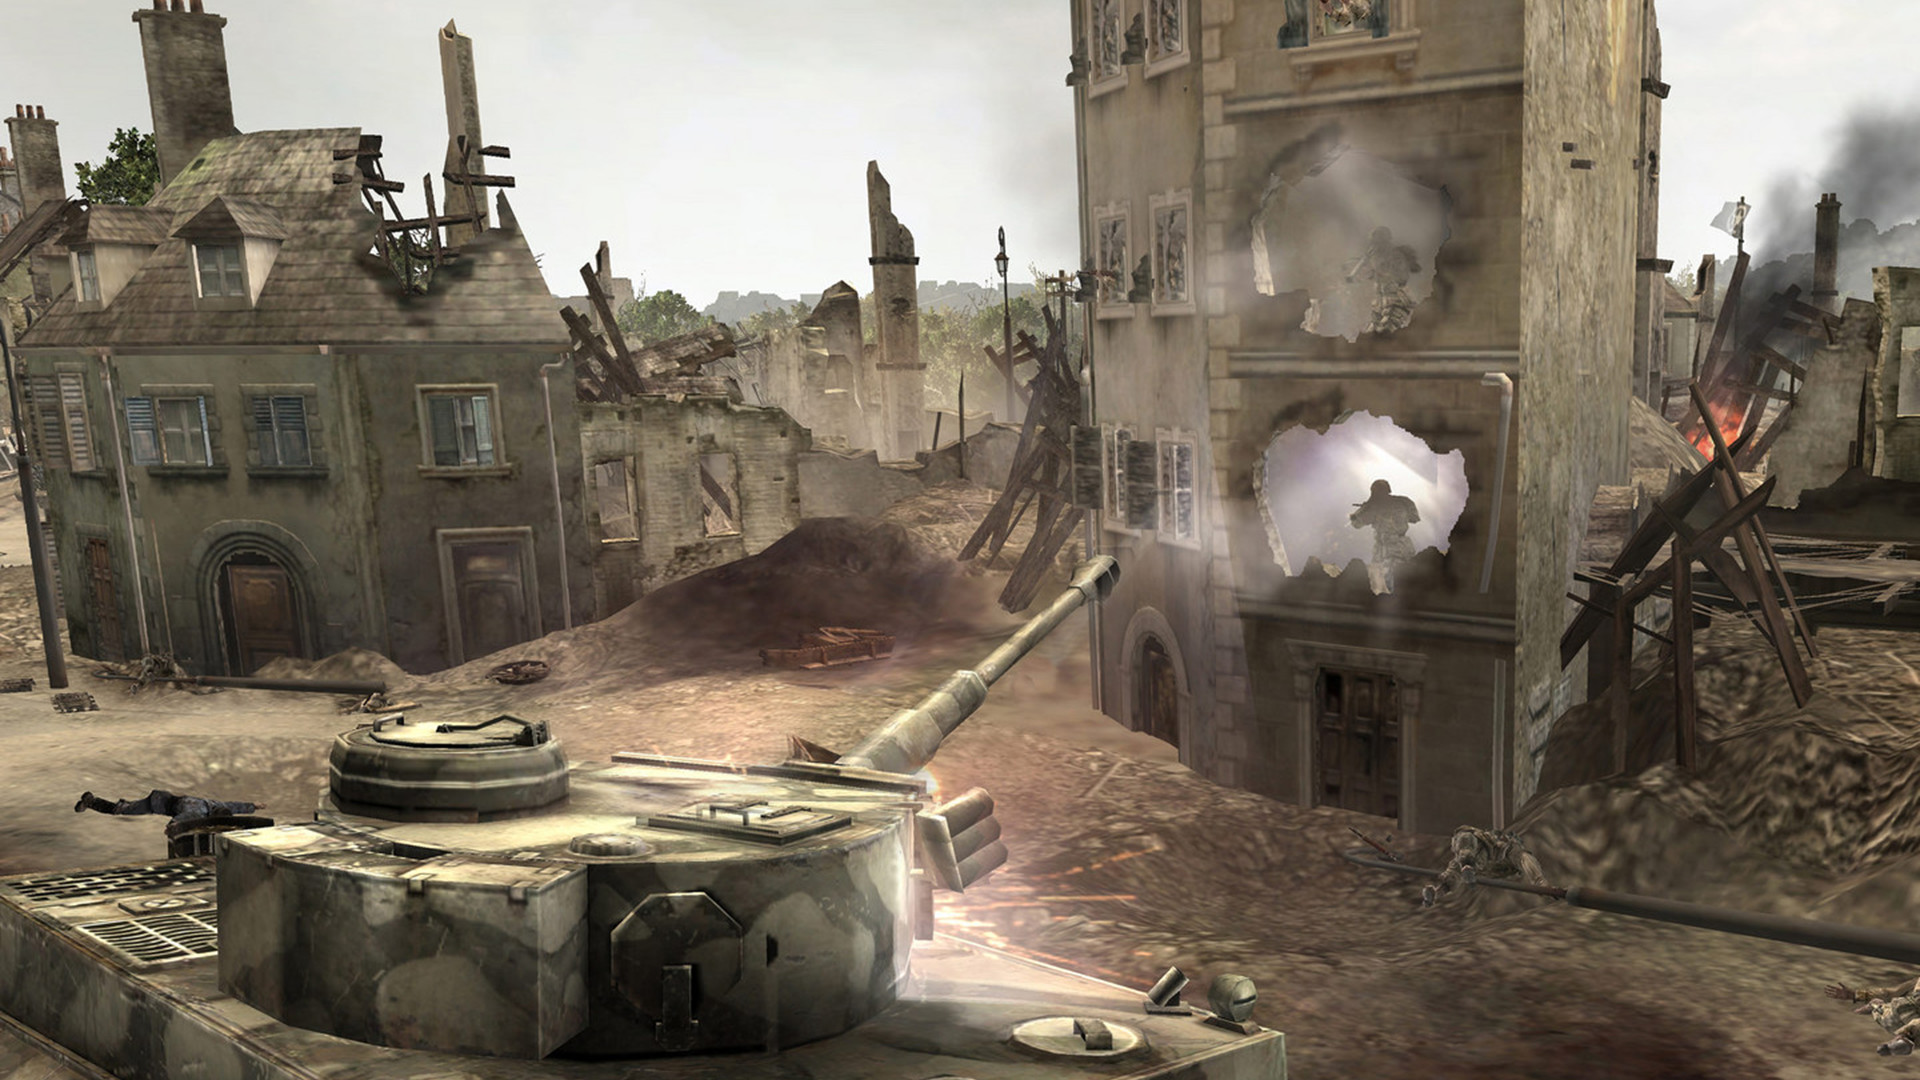 company of heroes 2 master collection cheat code